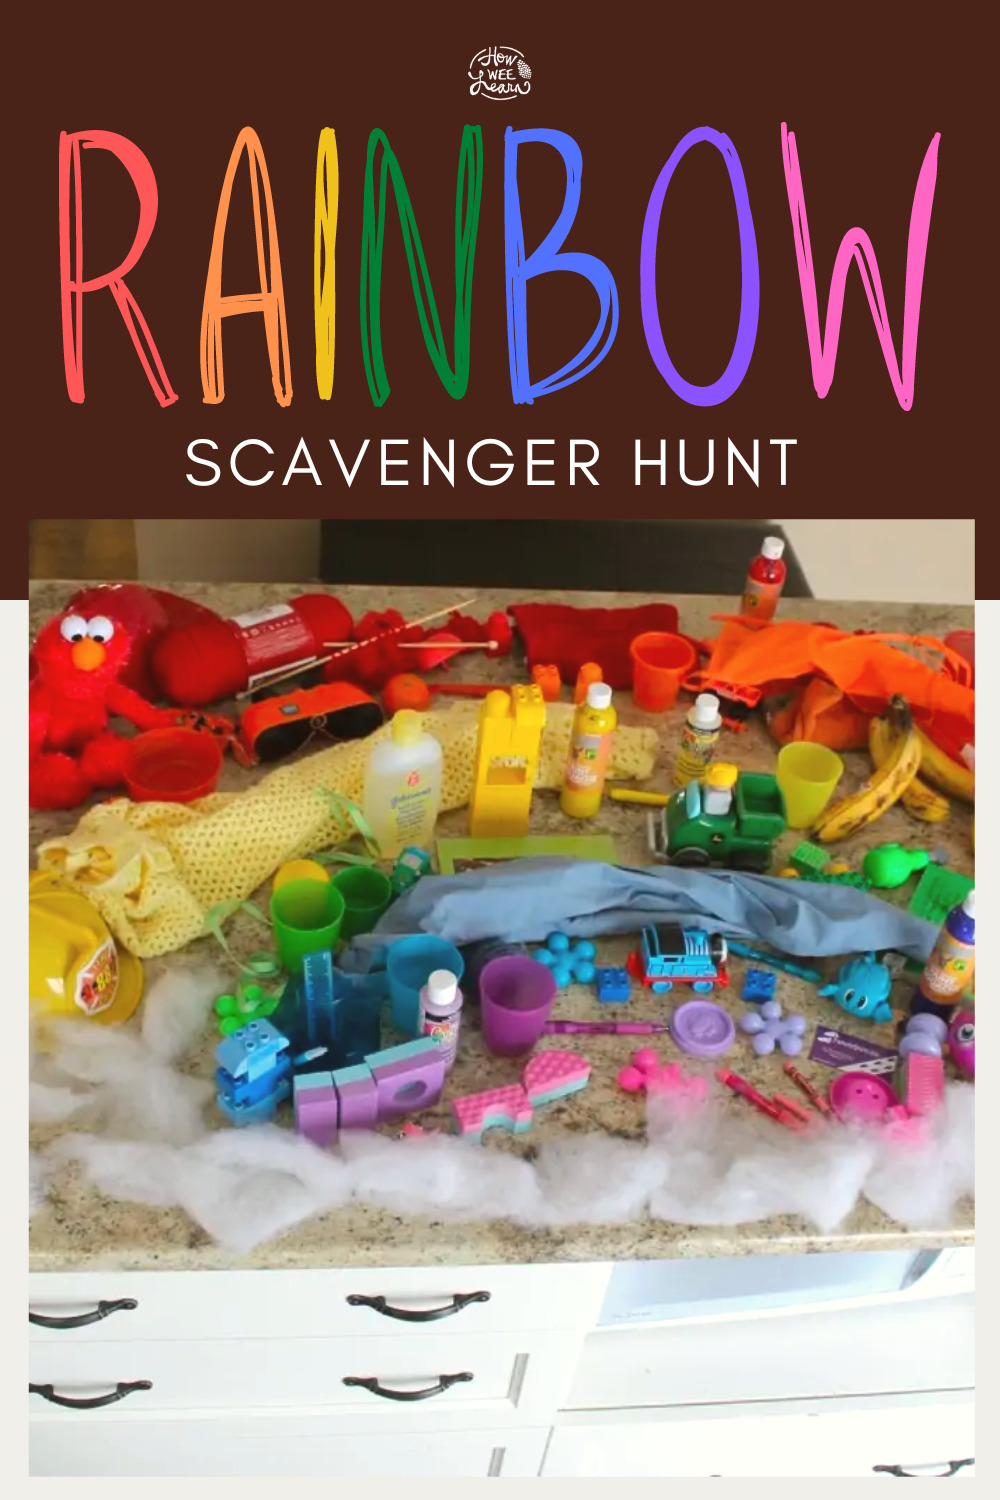 This rainbow scavenger hunt is a wonderful activity for children to learn their colors!